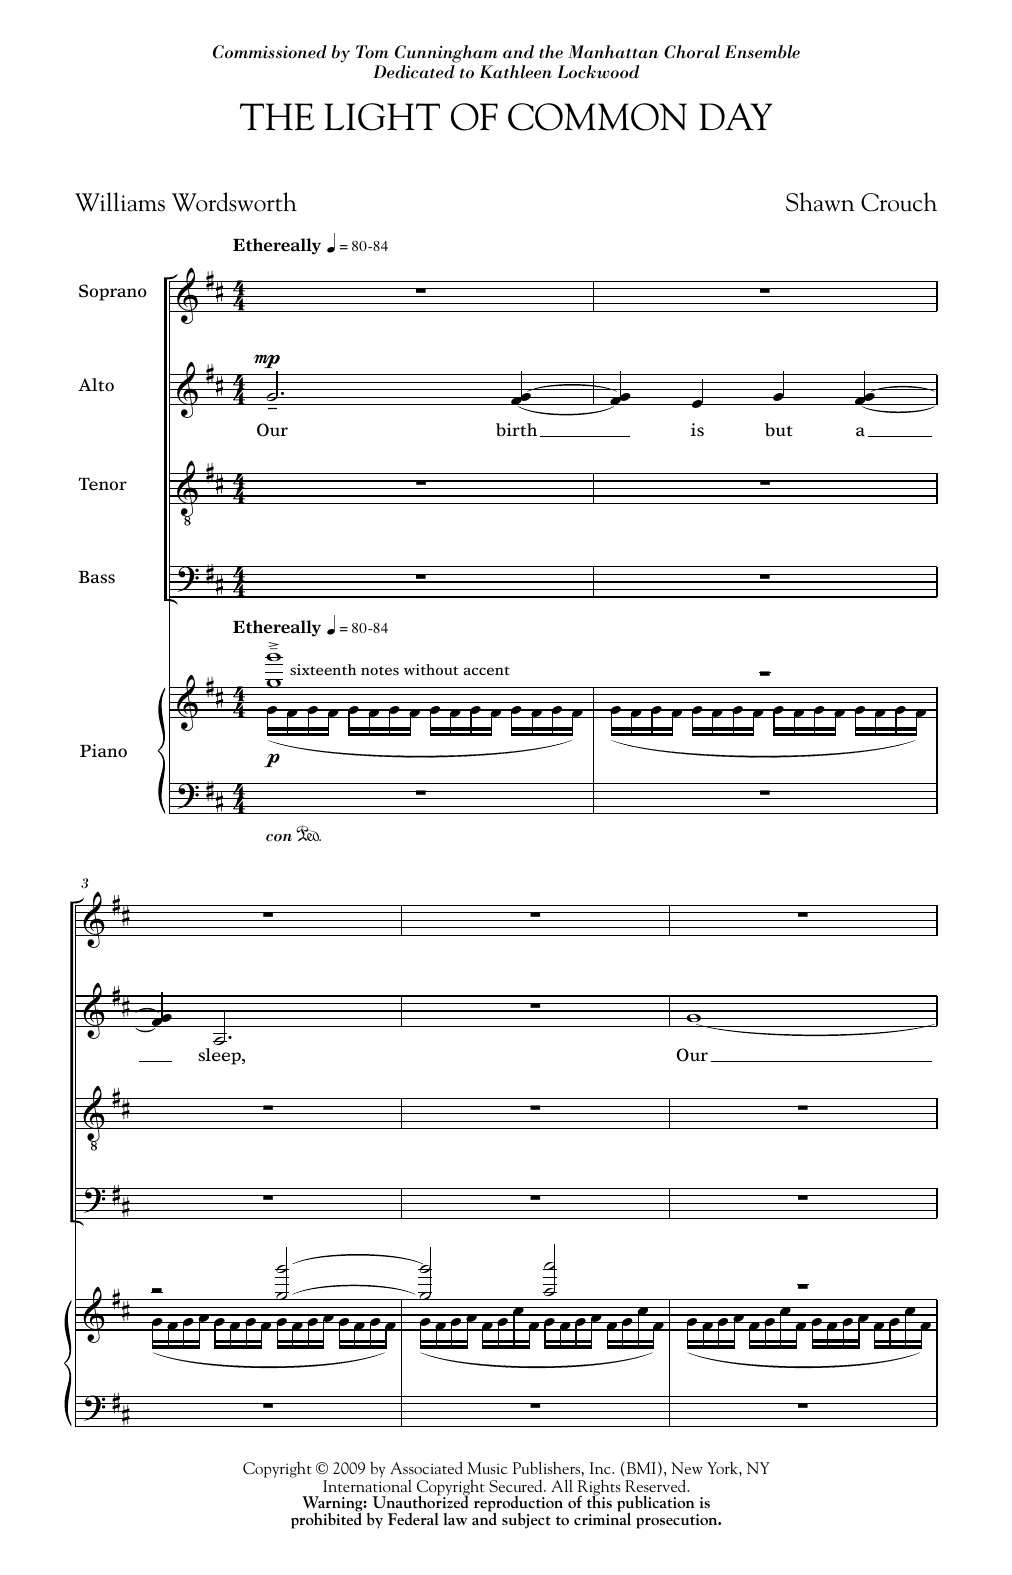 Download Shawn Crouch Light Of Common Day Sheet Music